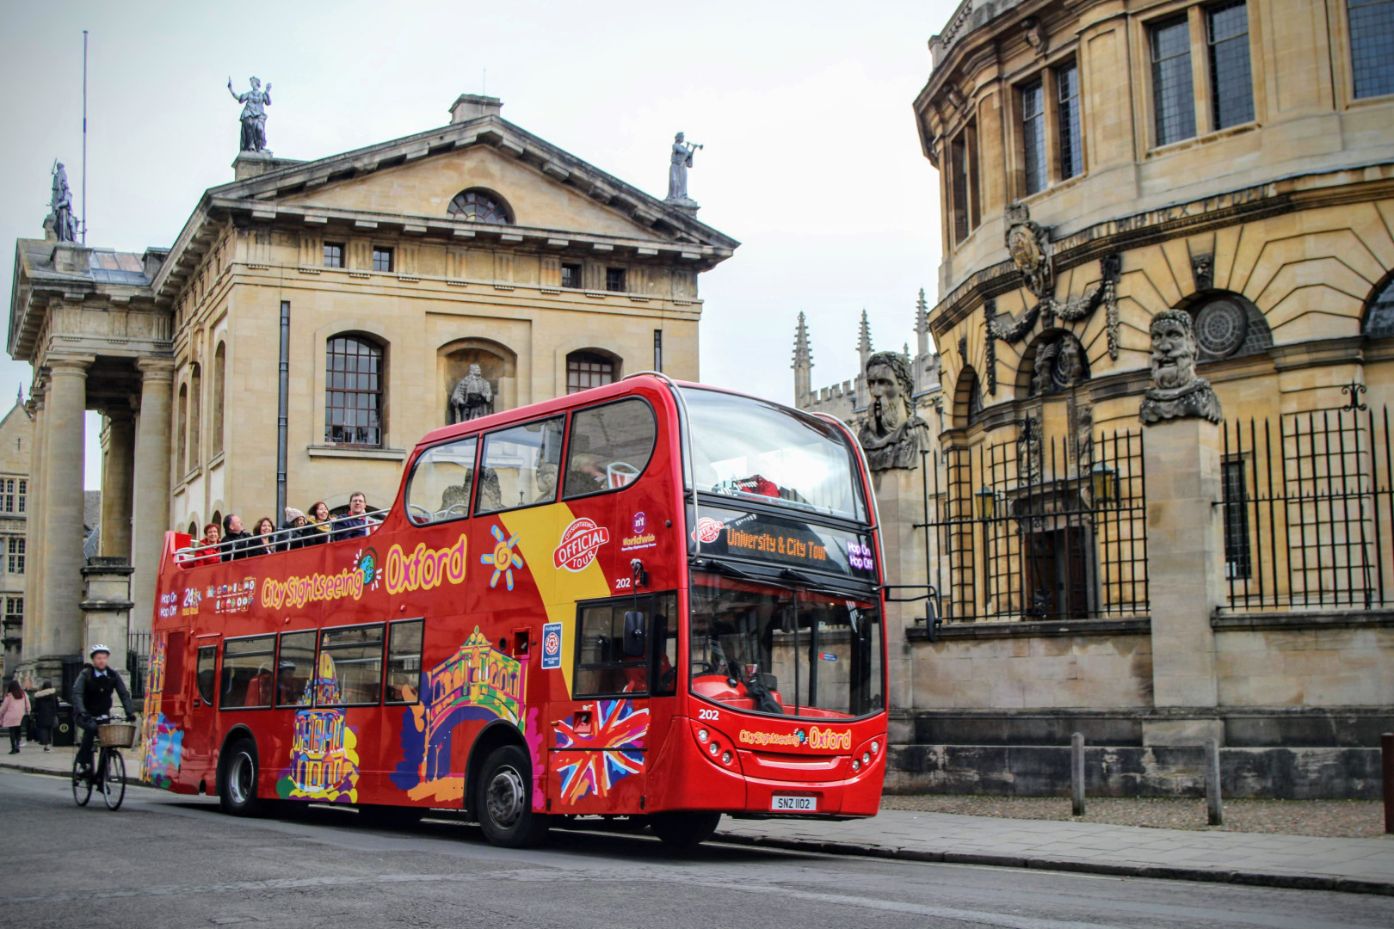 City Sightseeing Oxford offering discounts